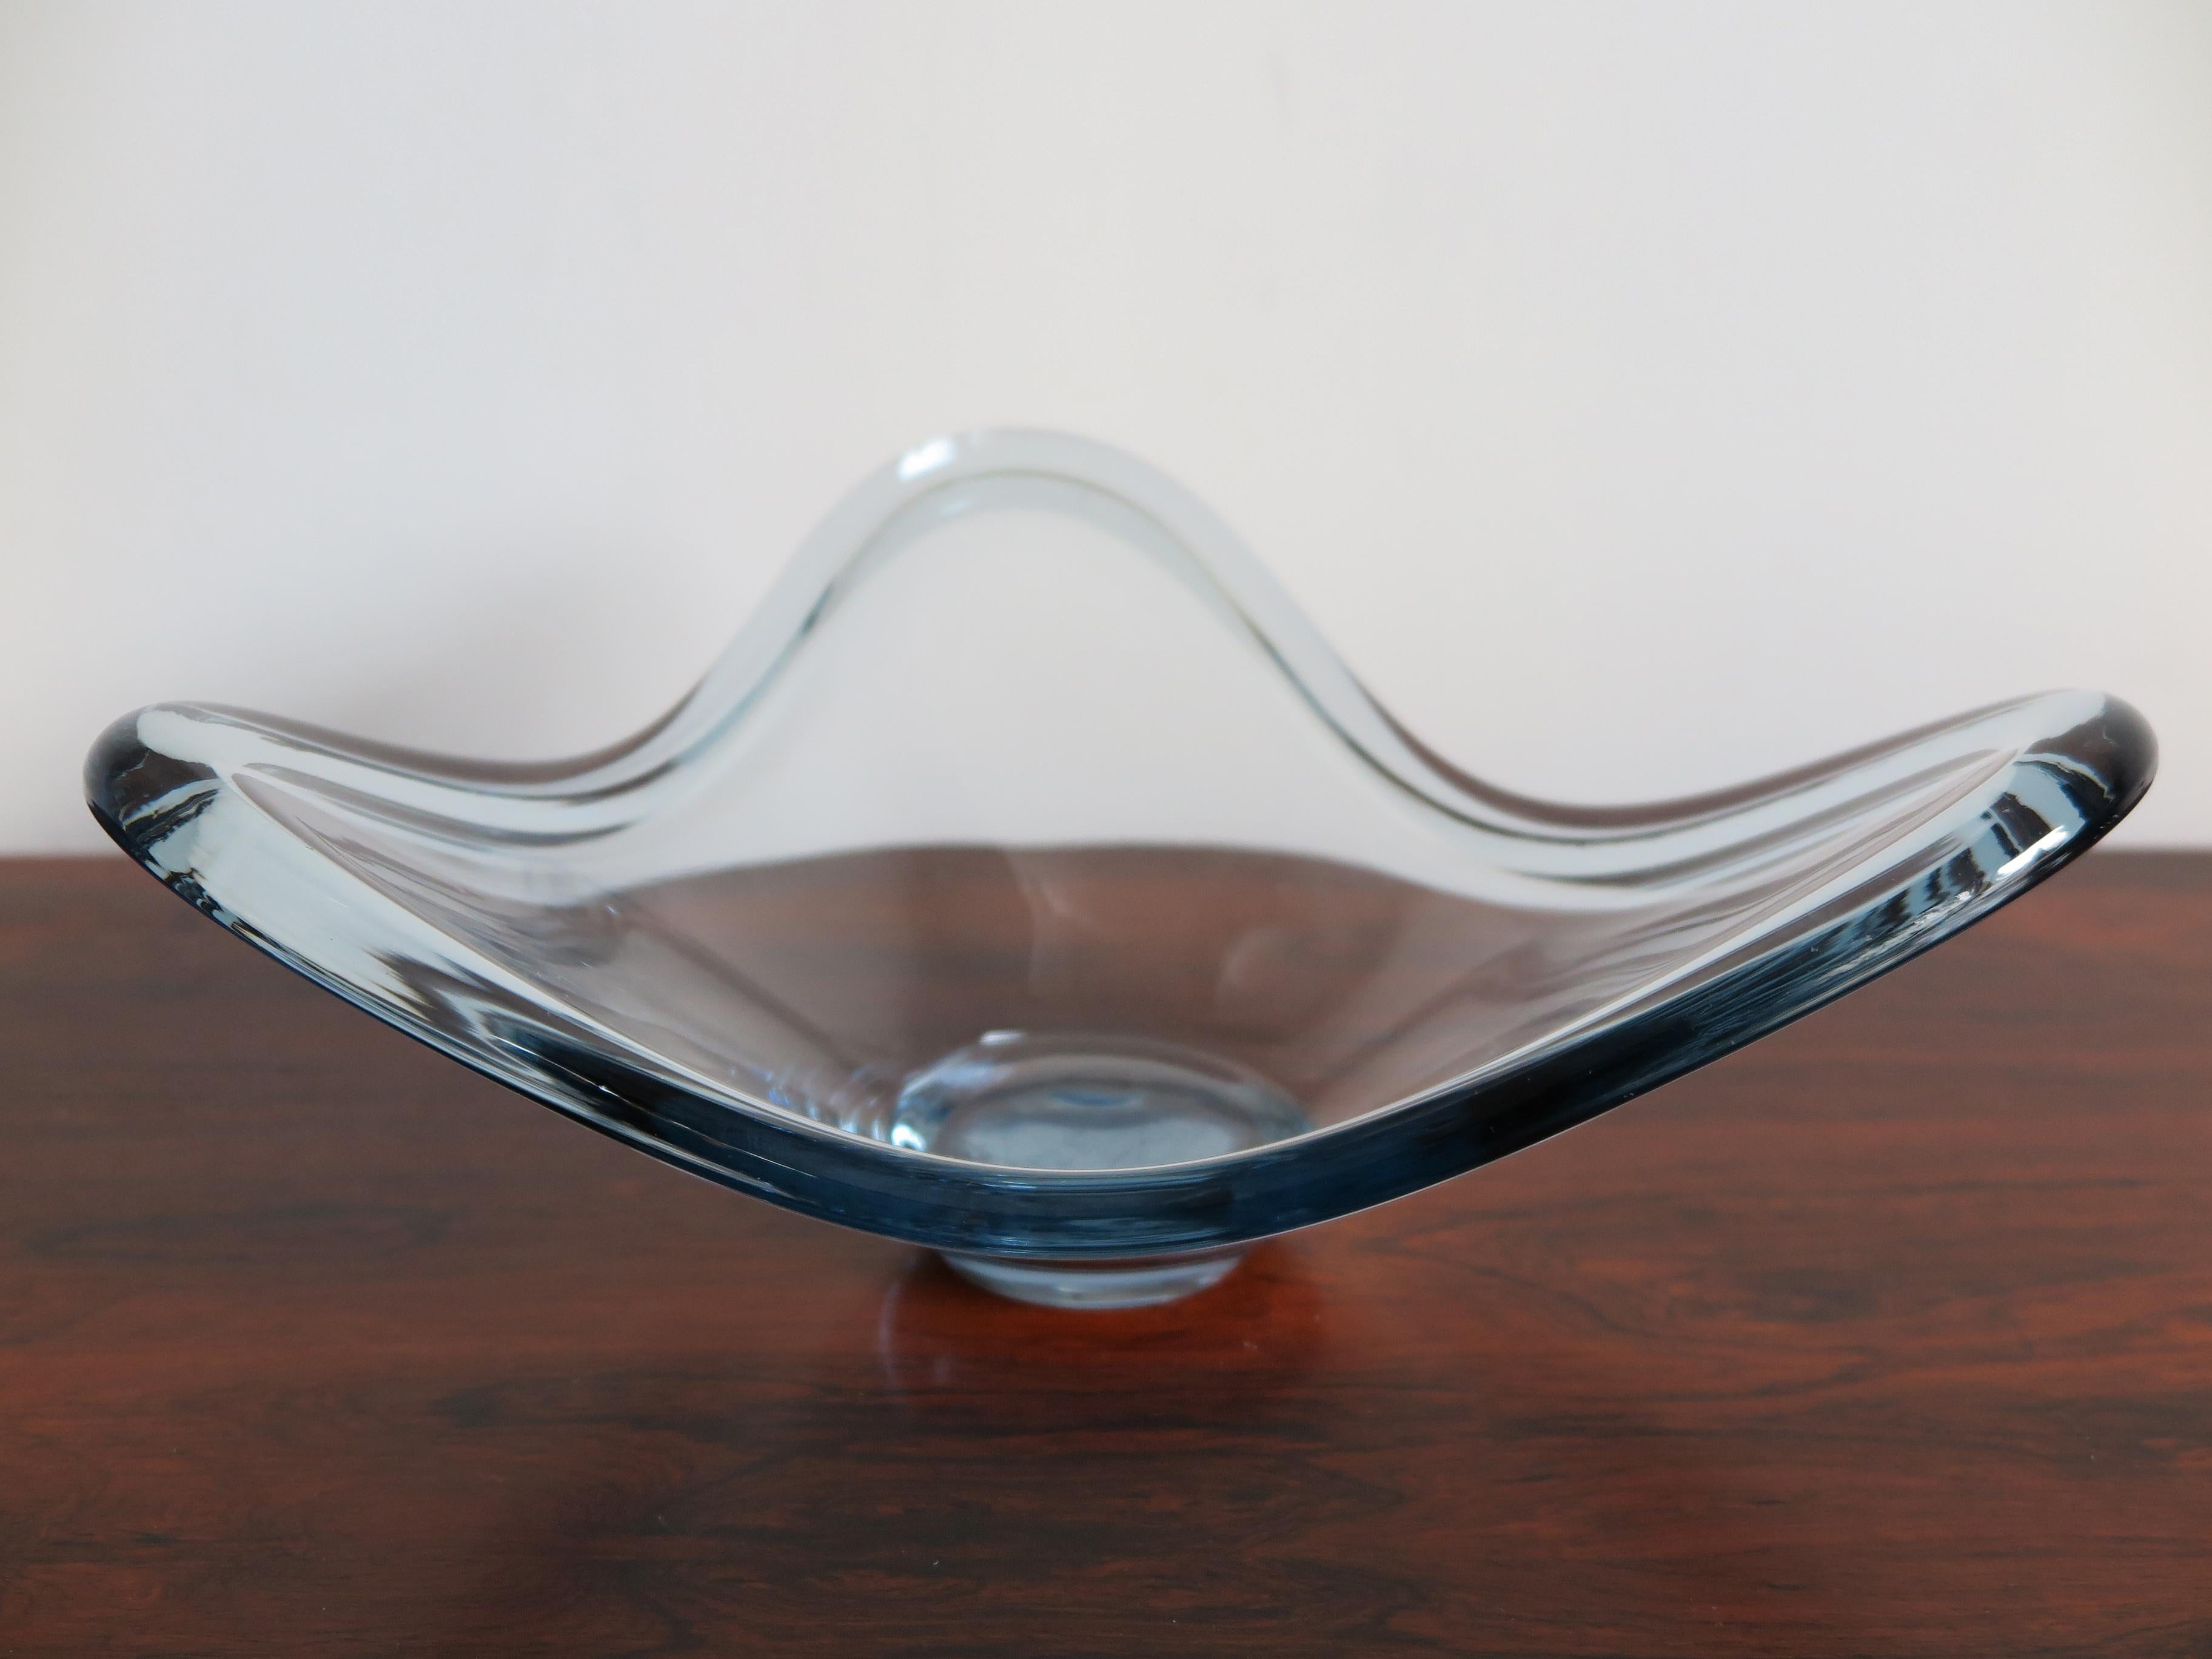 Scandinavian glass light blue vase centerpiece designed by danish artist Per Lütken and produced by Holmegaard, signature and numbering engraved on the bottom, 1960s

Please note that the item is original of the period and this shows normal signs